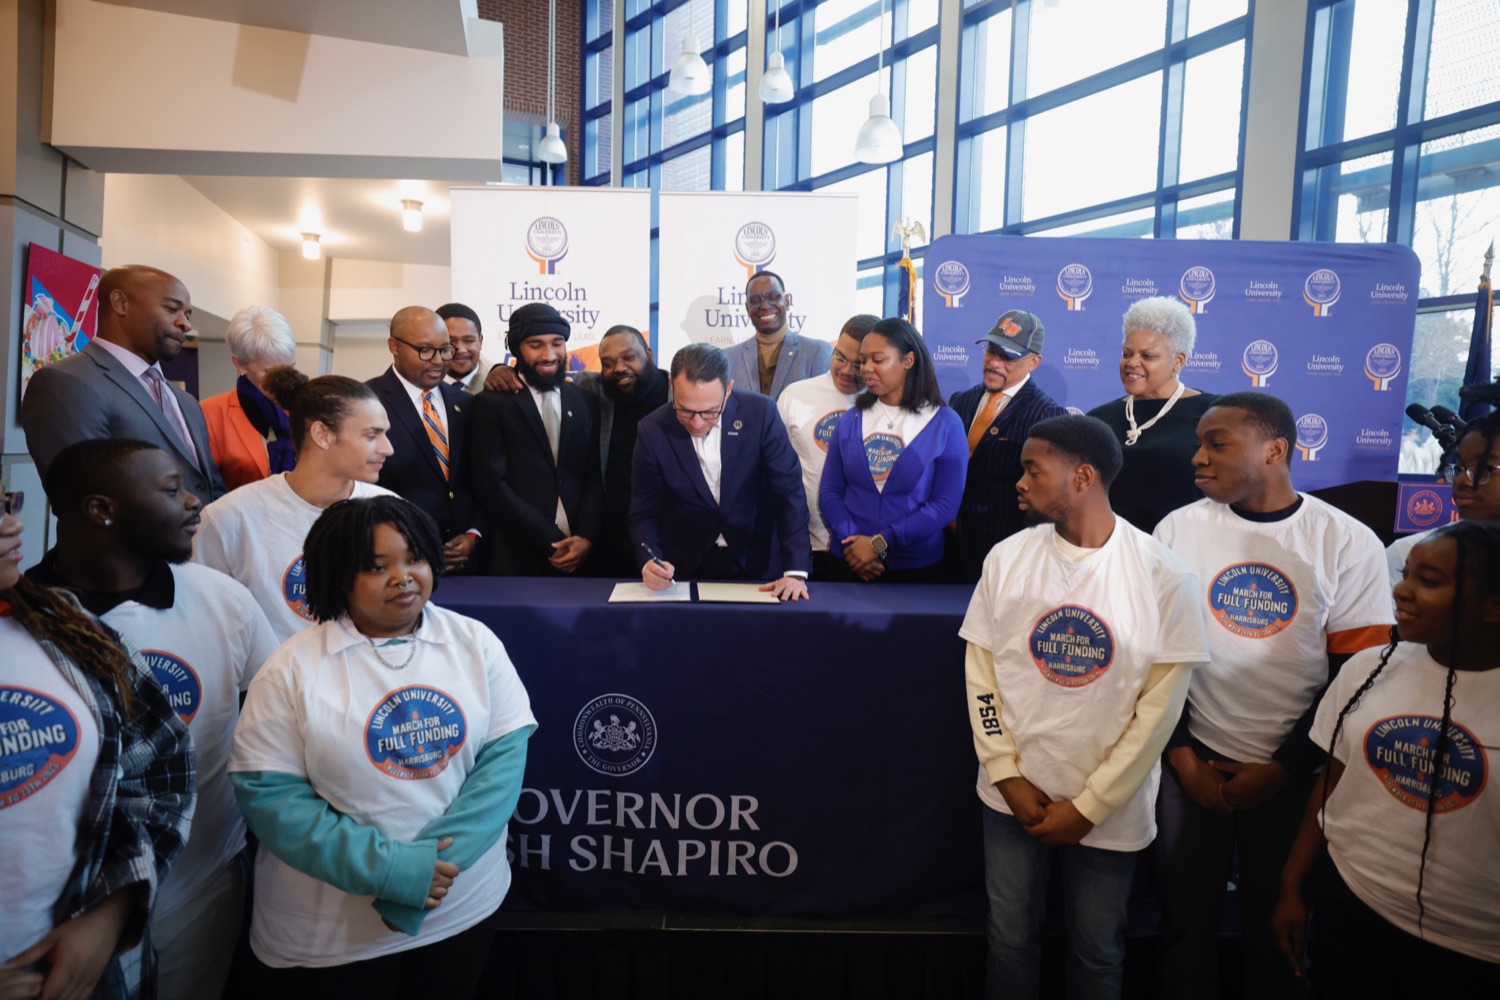 Governor Josh Shapiro joined Secretary of Education Dr. Khalid Mumin, Rep. Jordan Harris, Sen. Vincent Hughes, Sen. Carolyn Comitta, Lincoln University President Brenda Allen and Lincoln University students and staff for a ceremonial bill signing of House Bill (HB) 1461, which provides state funding for Lincoln University and other state-related universities.<br><a href="https://filesource.amperwave.net/commonwealthofpa/photo/24135_gov_HB1461_14.jpeg" target="_blank">⇣ Download Photo</a>